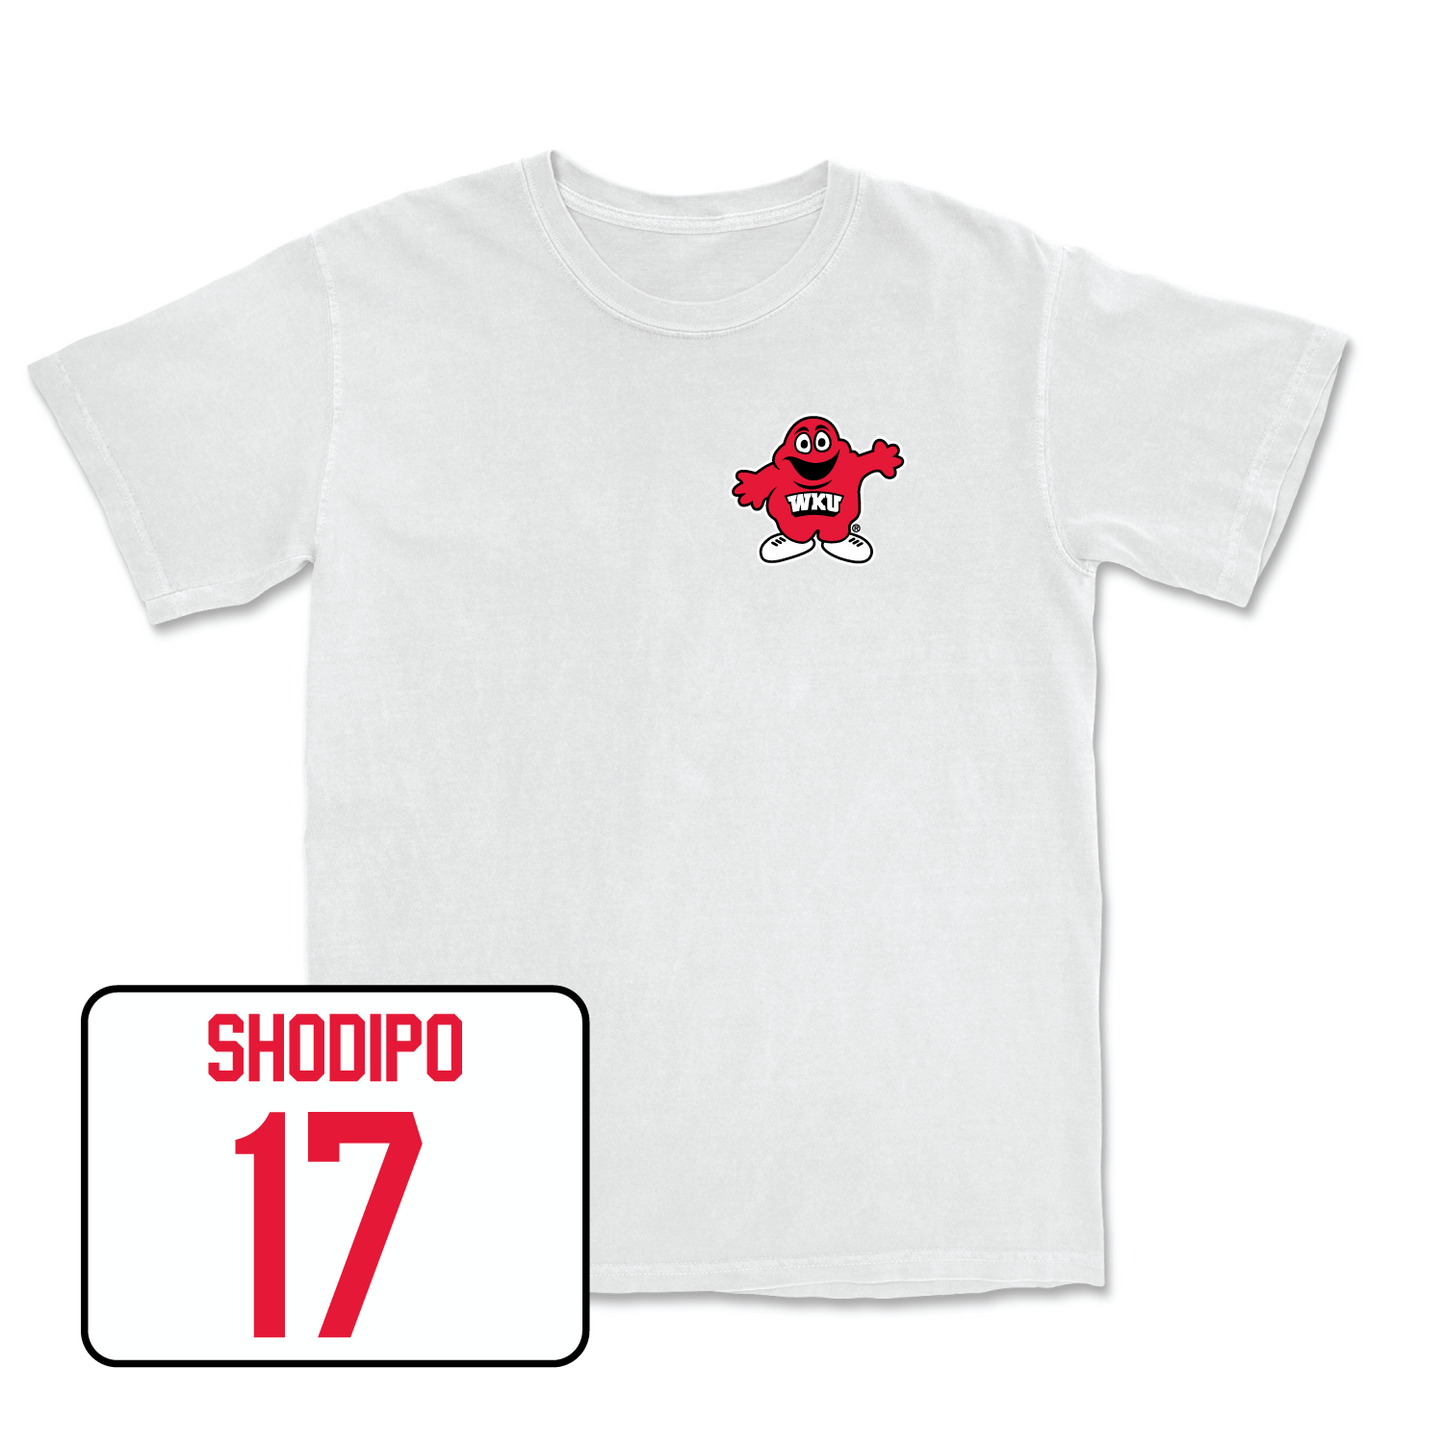 White Football Big Red Comfort Colors Tee 4 Youth Small / Josh Shodipo | #17